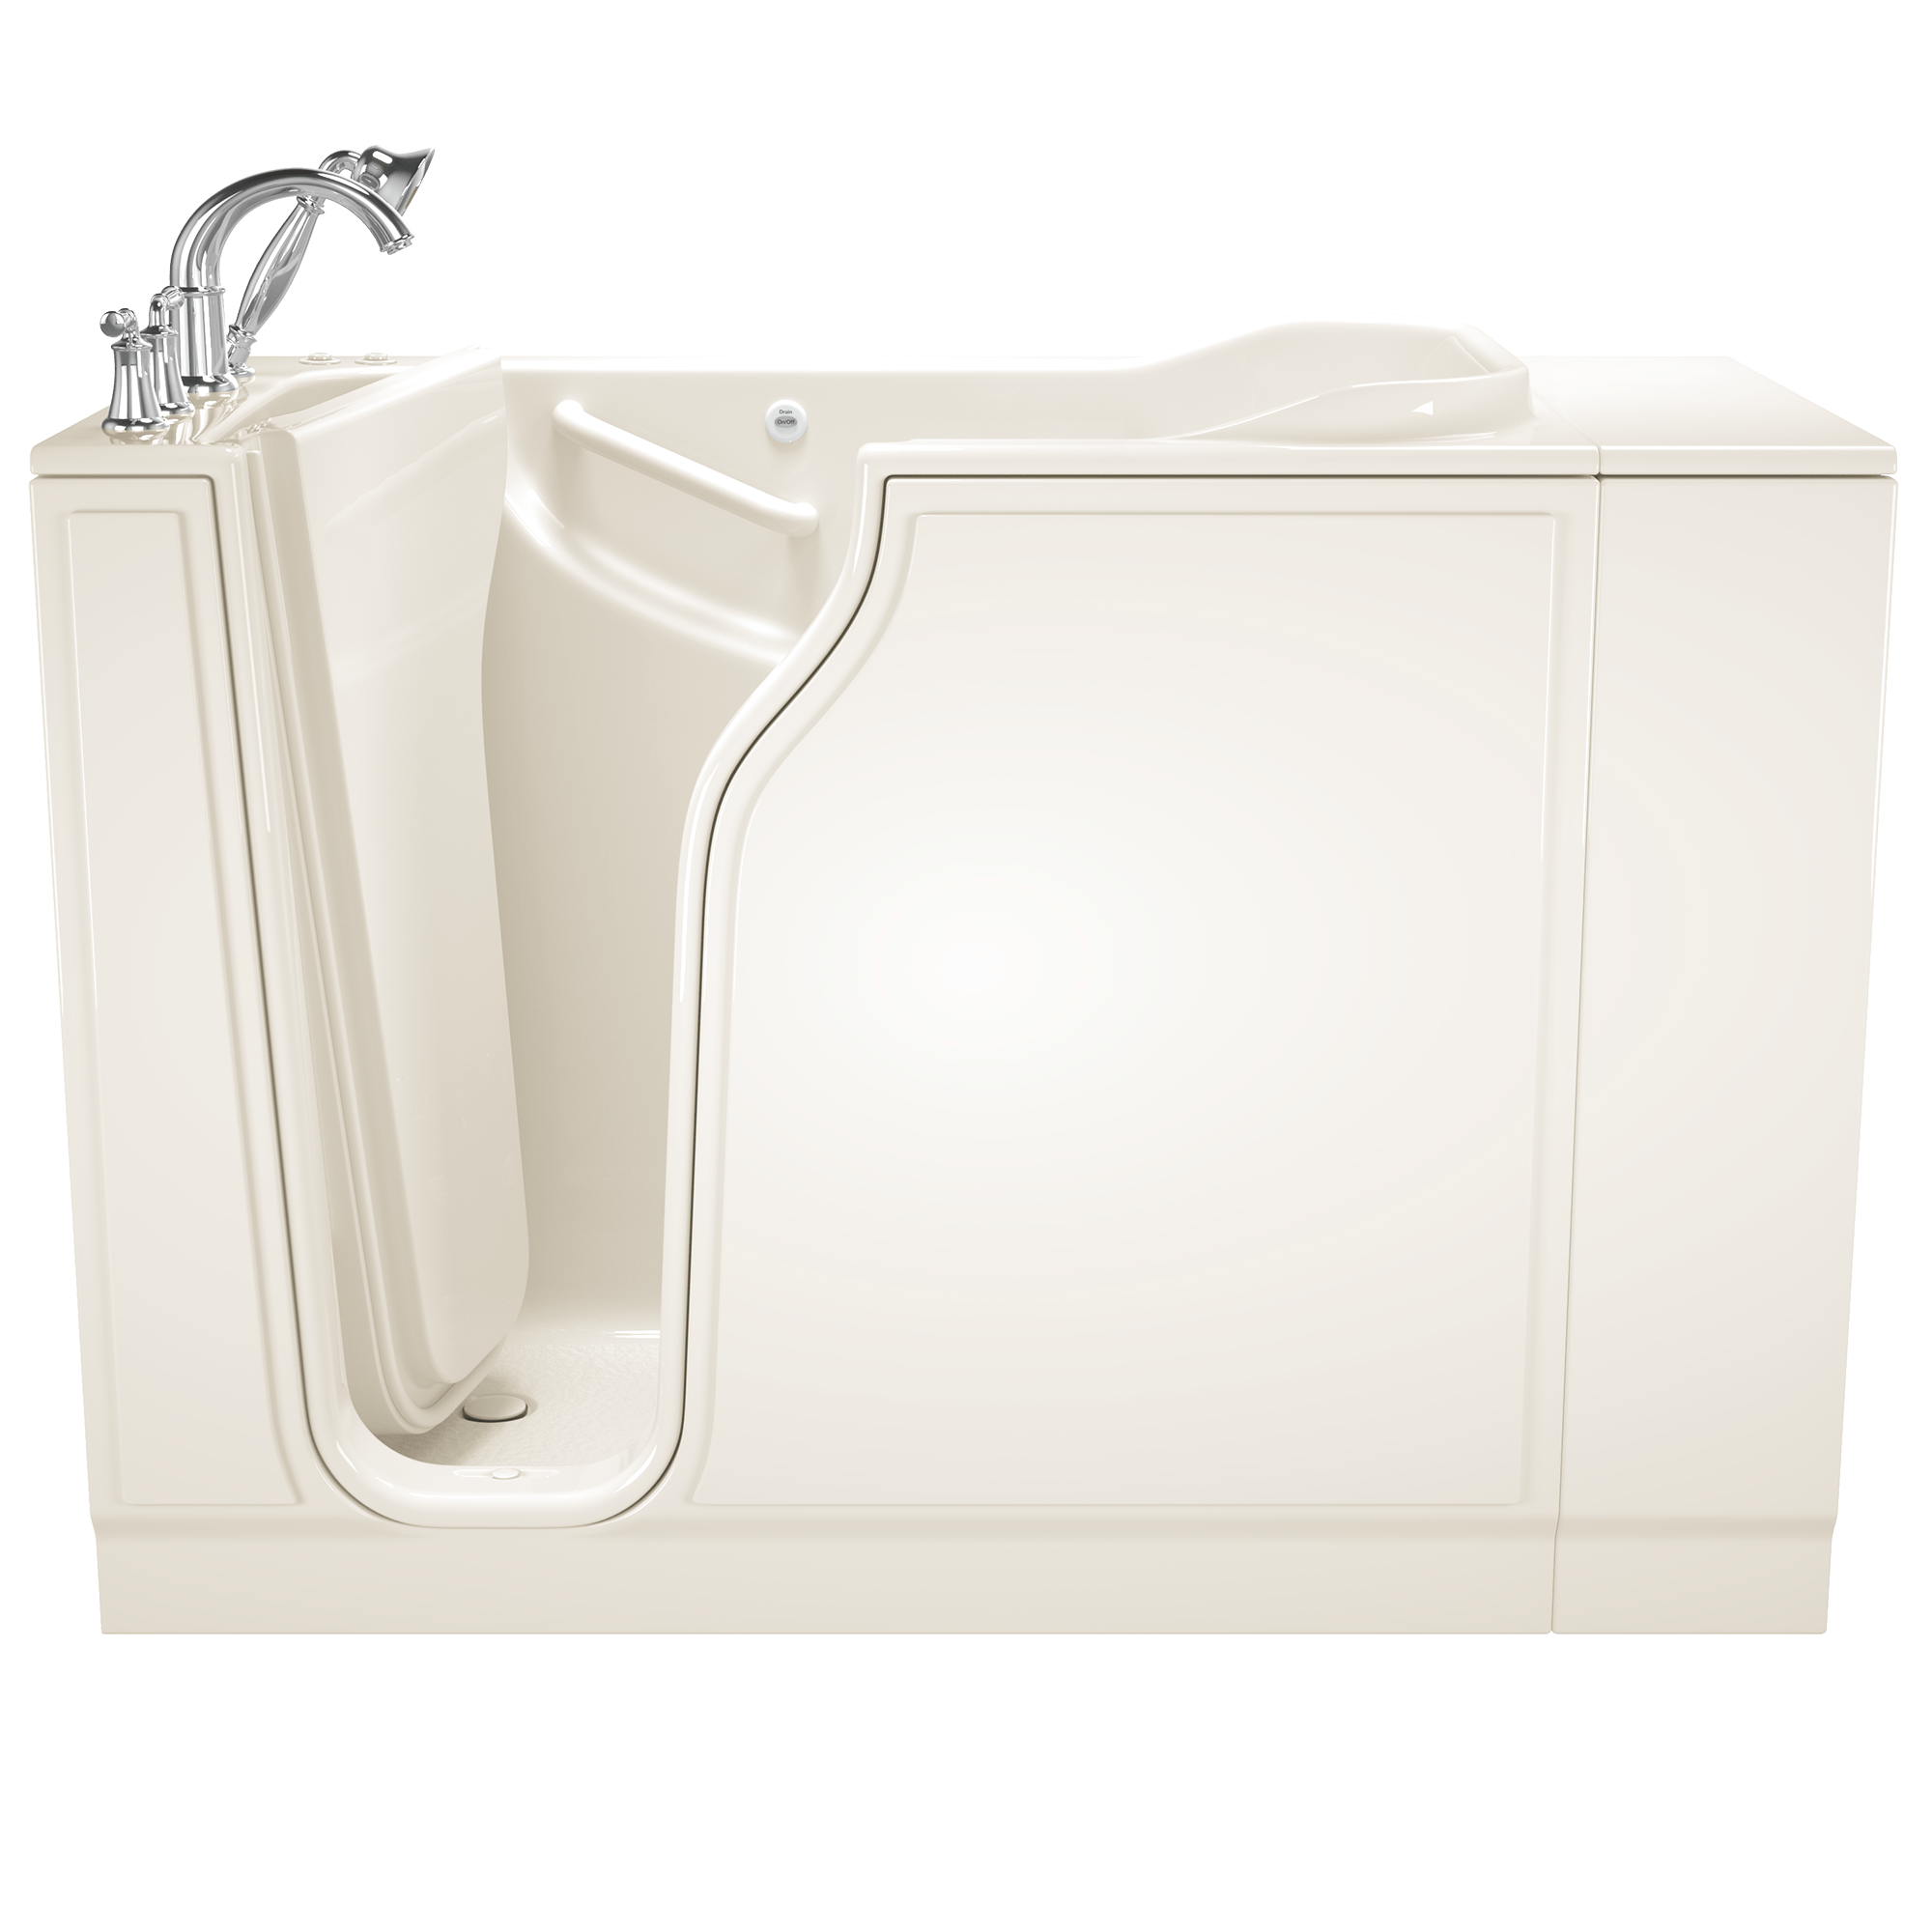 Gelcoat Value Series 30x52 Inch Walk In Bathtub with Combination Air Spa system and Whirlpool Massage System   Left Hand Door and Drain WIB LINEN